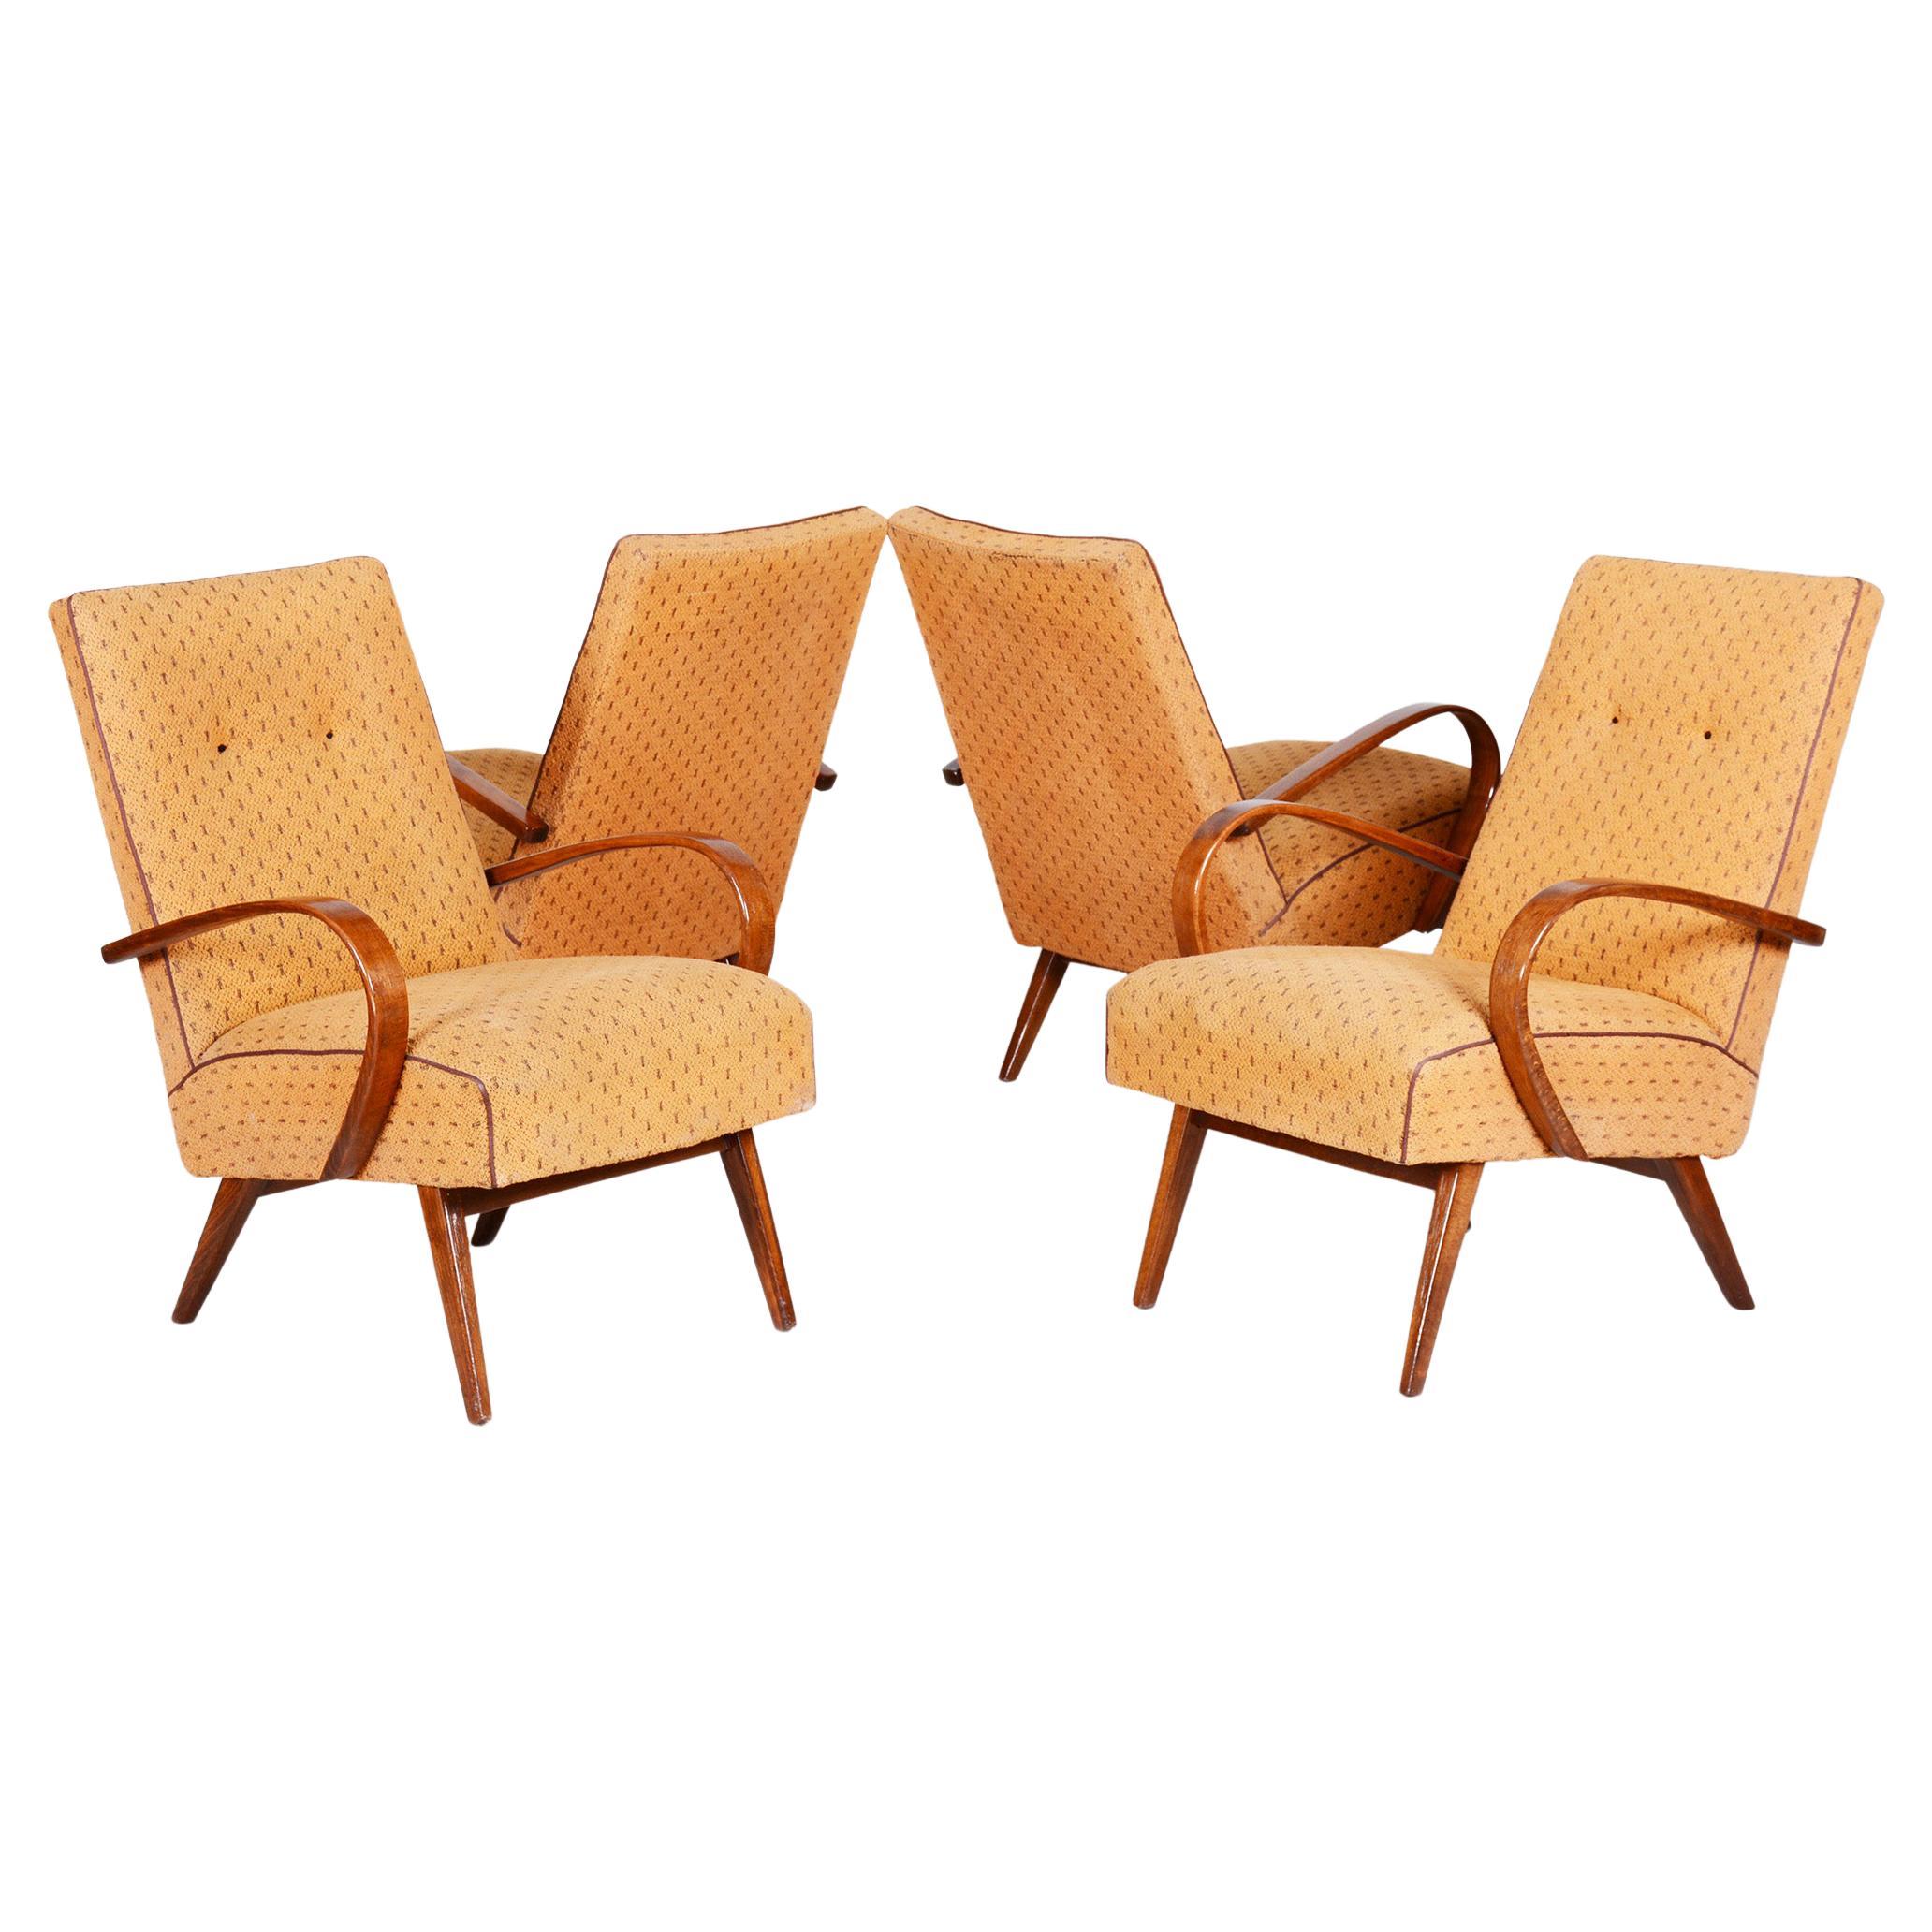 Four Yellow Mid Century Armchairs Made in 1950s Czechia, Original Condition For Sale